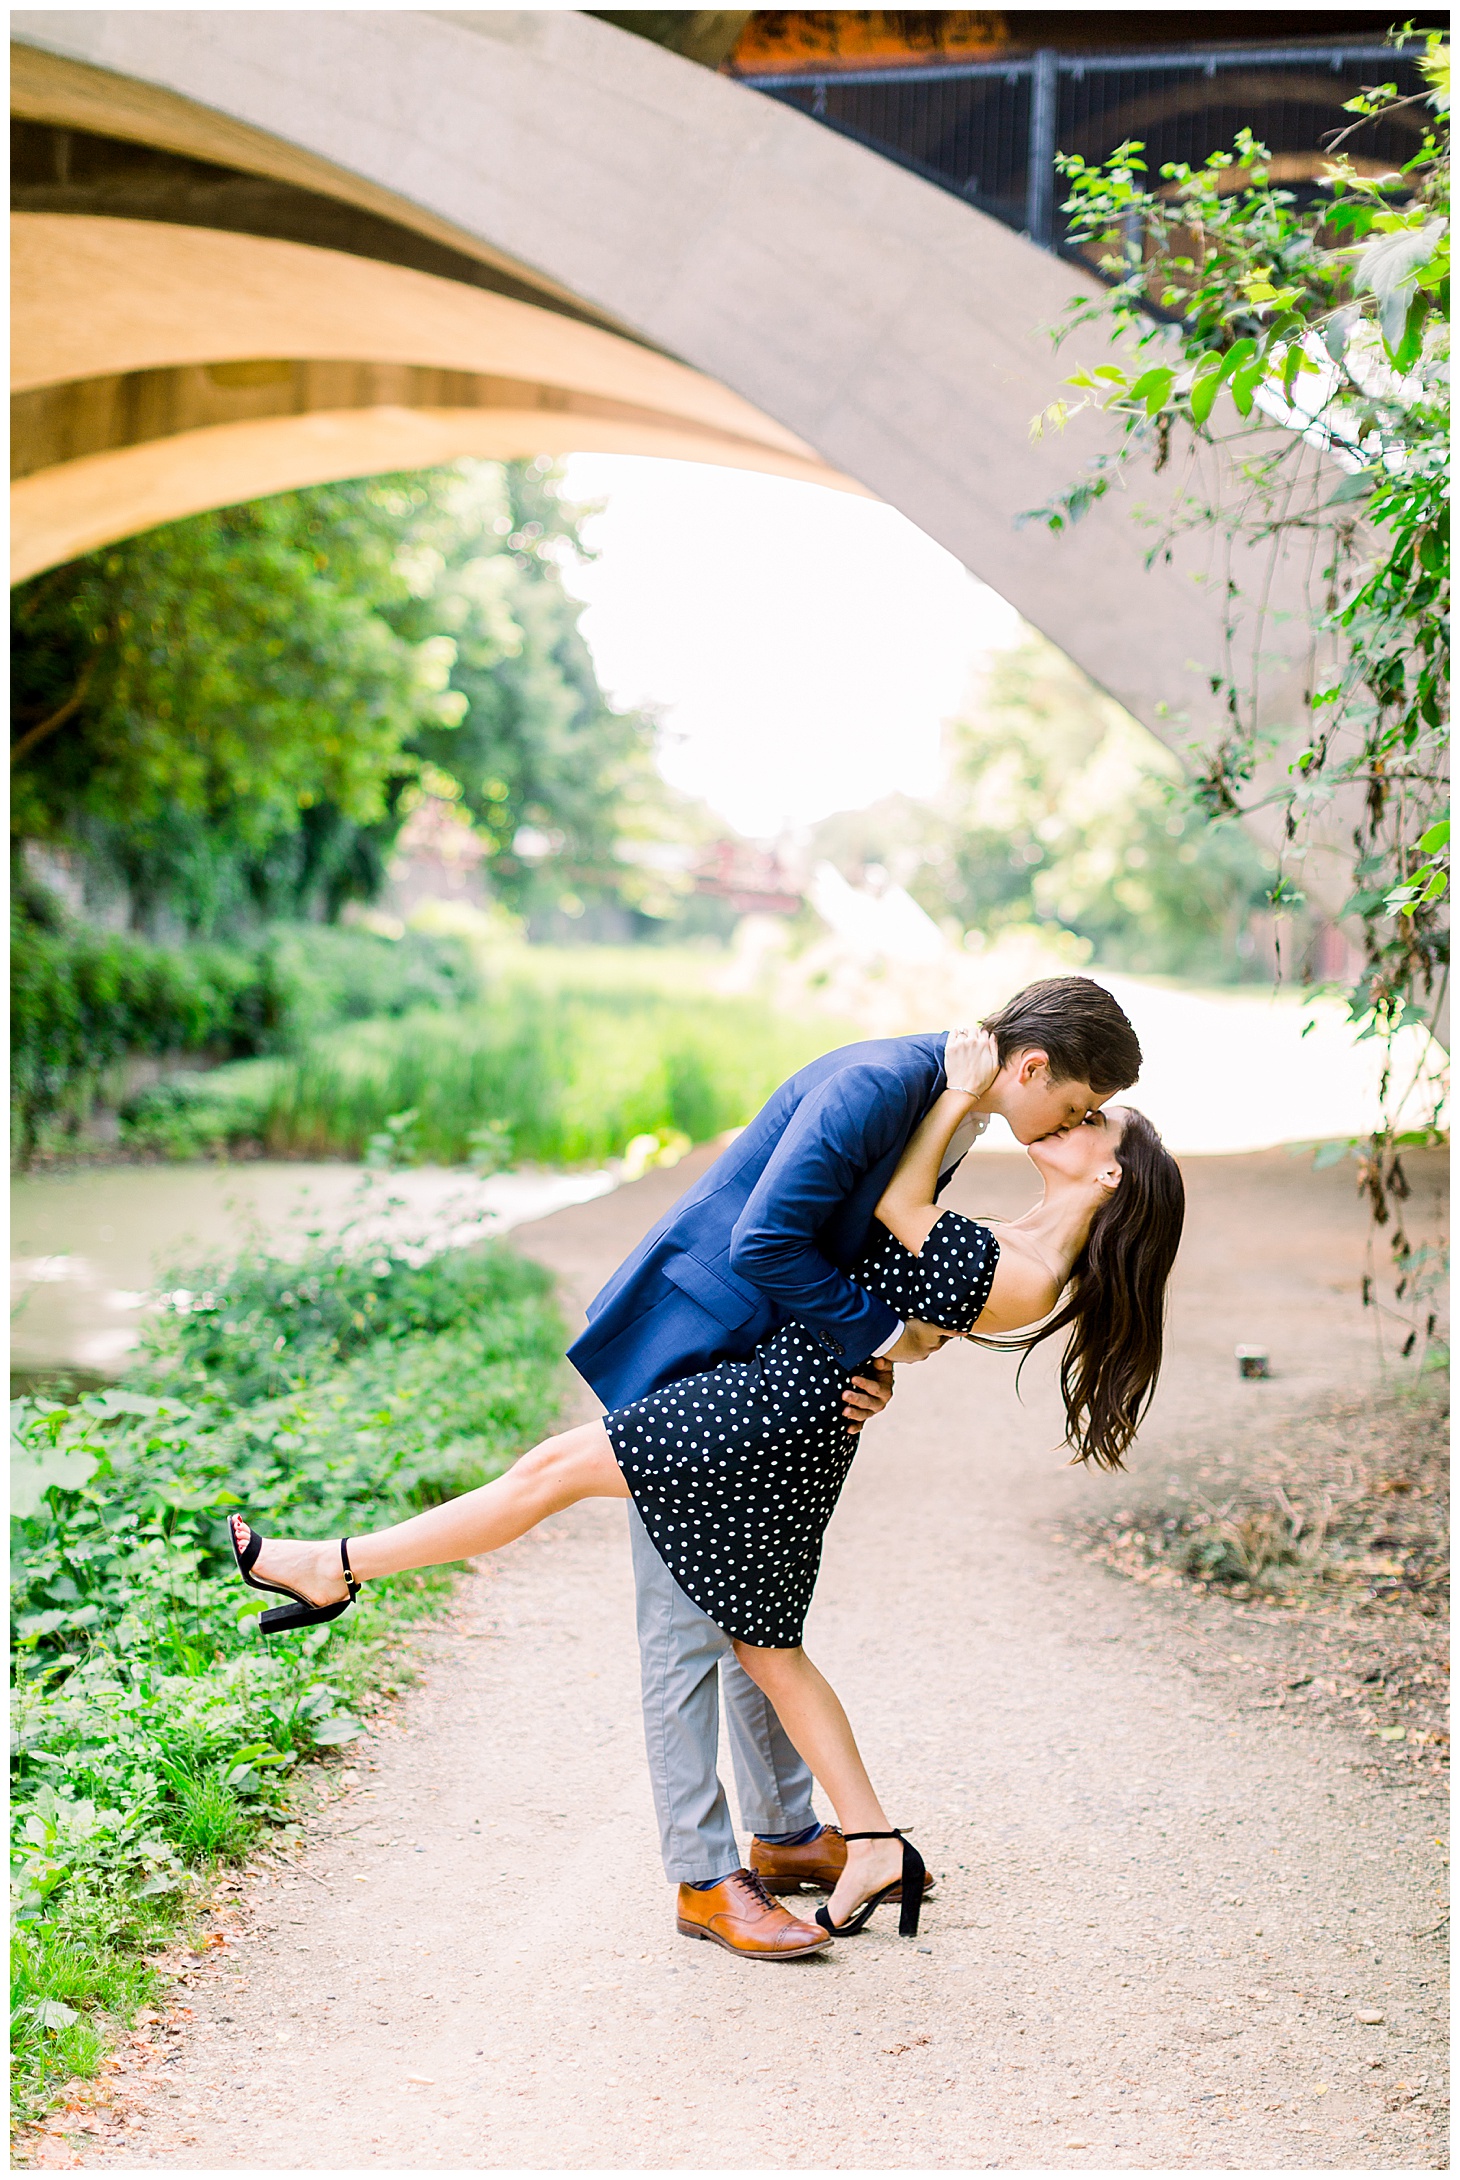 Preppy Morning Engagement Session in DC by Sarah Bradshaw Photography